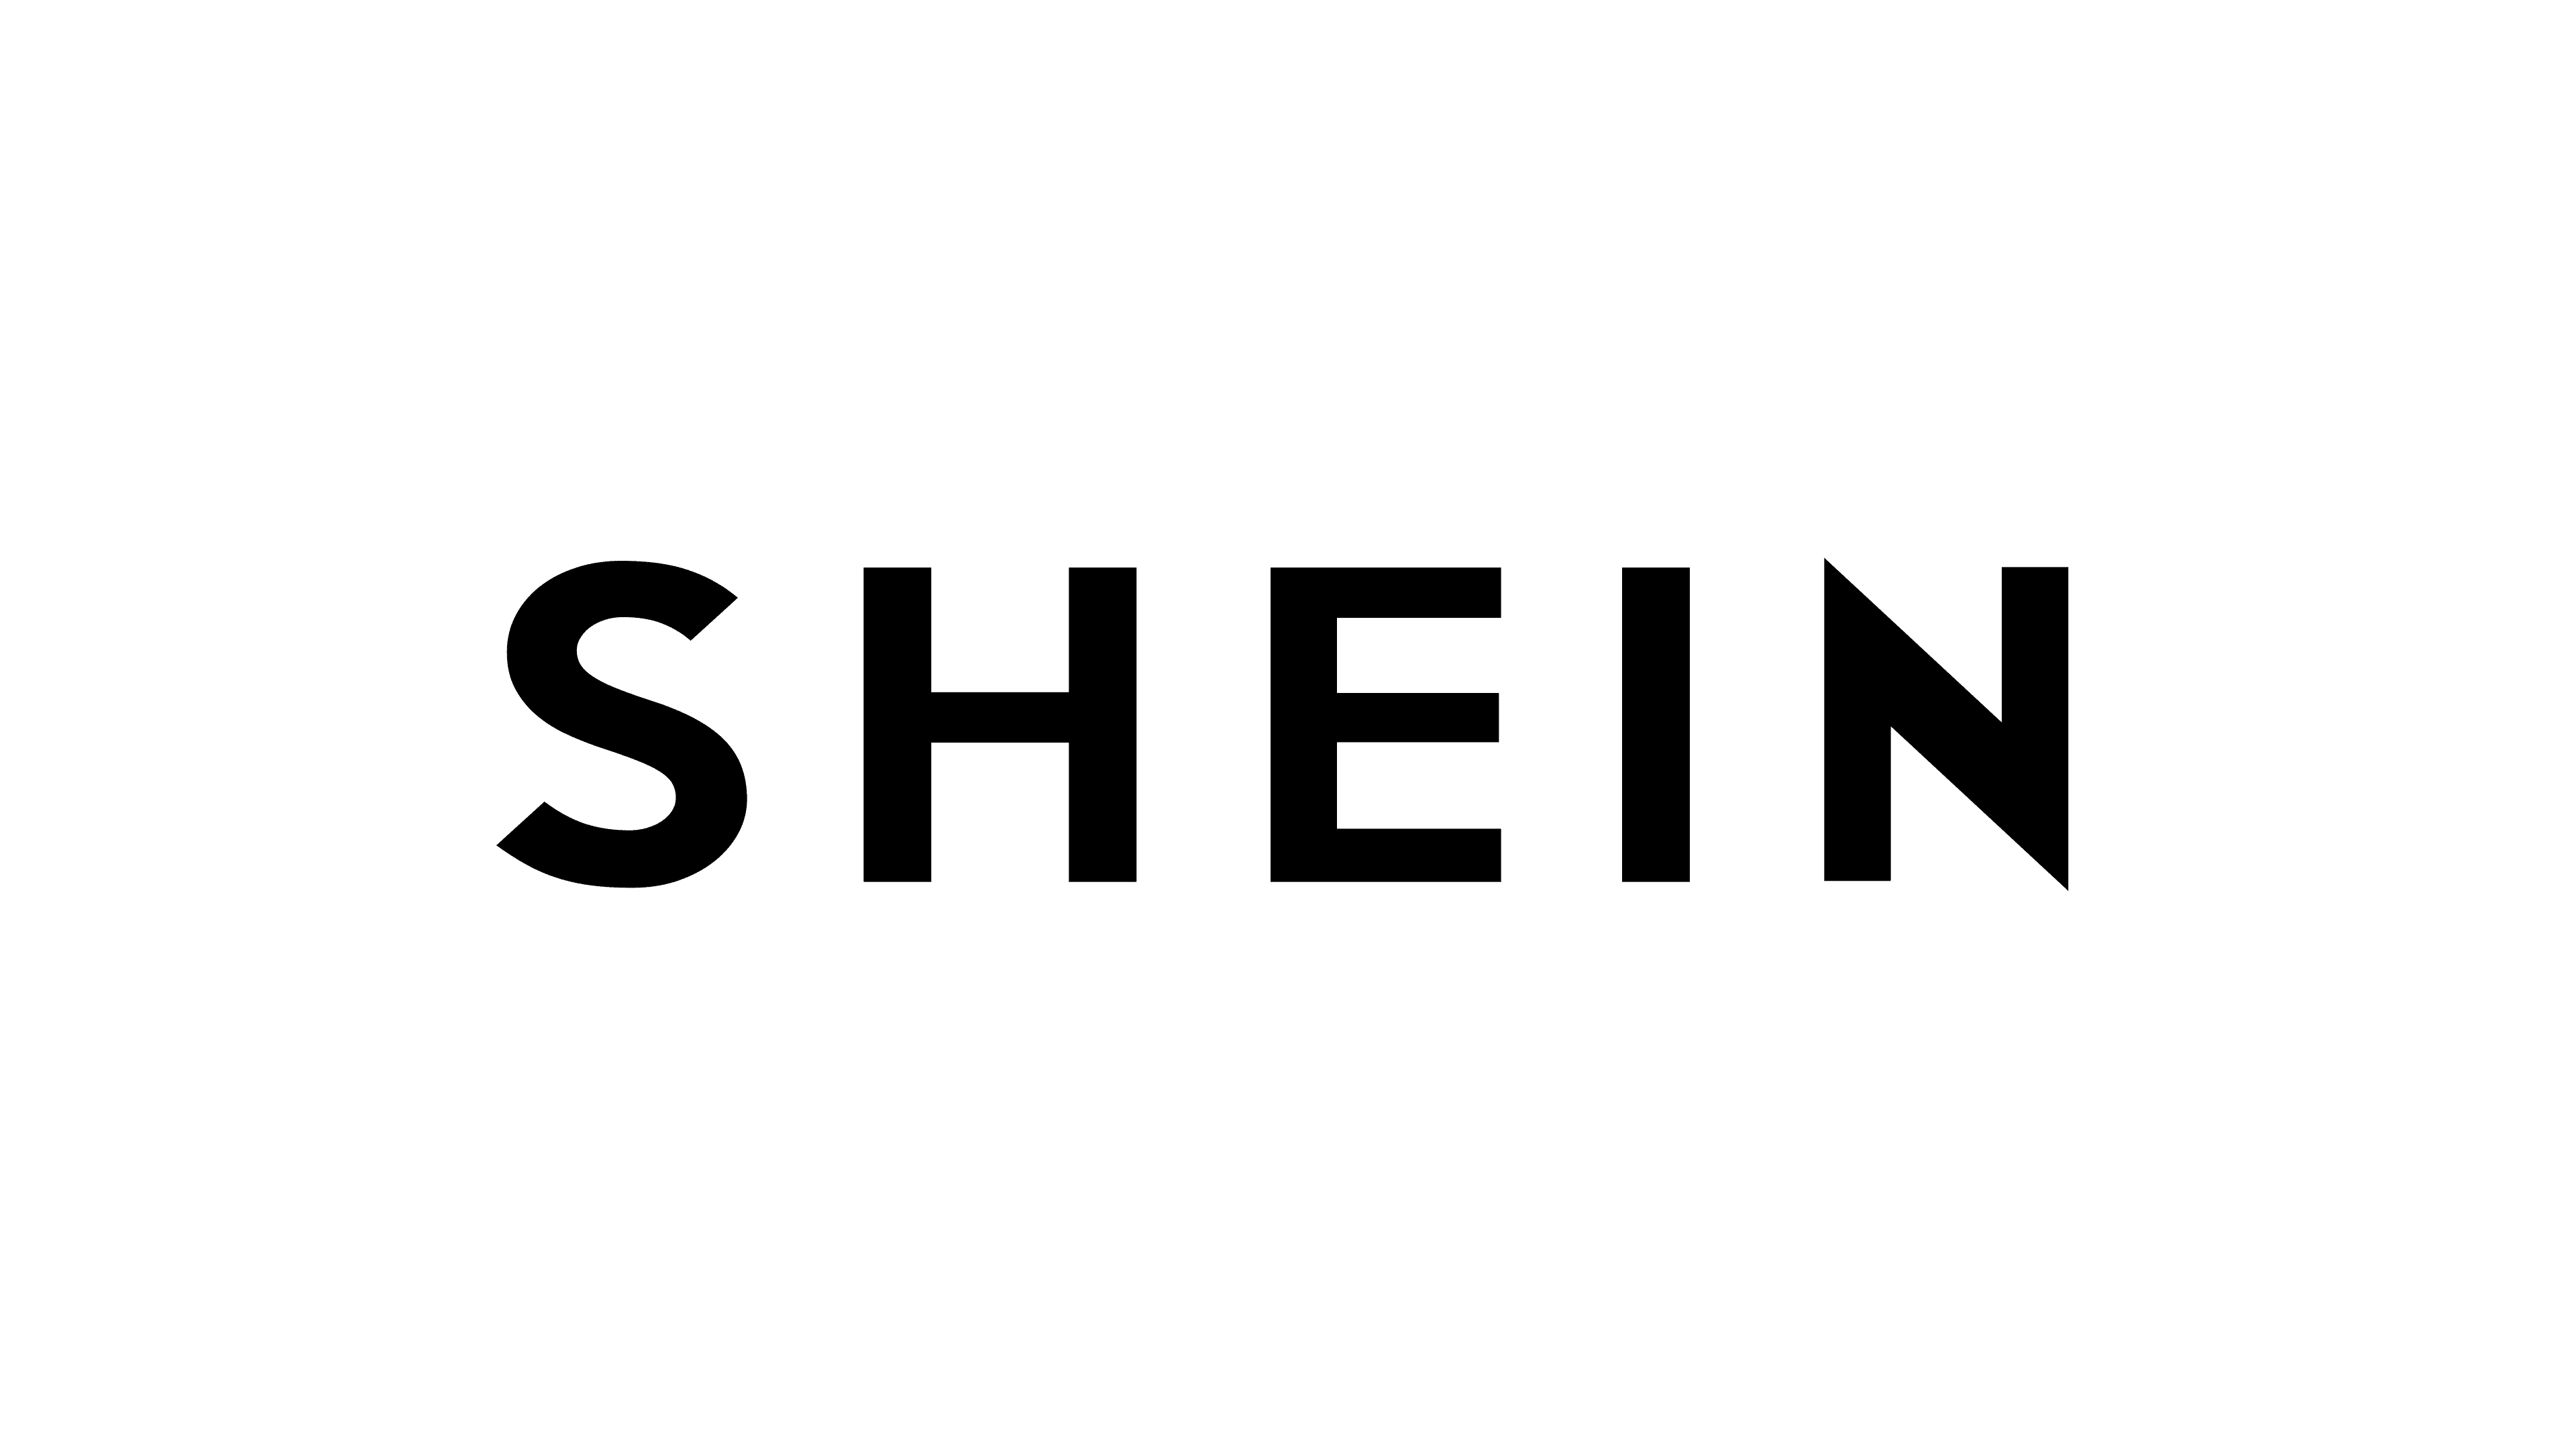 Is this SHEIN collab email real? : r/Shein